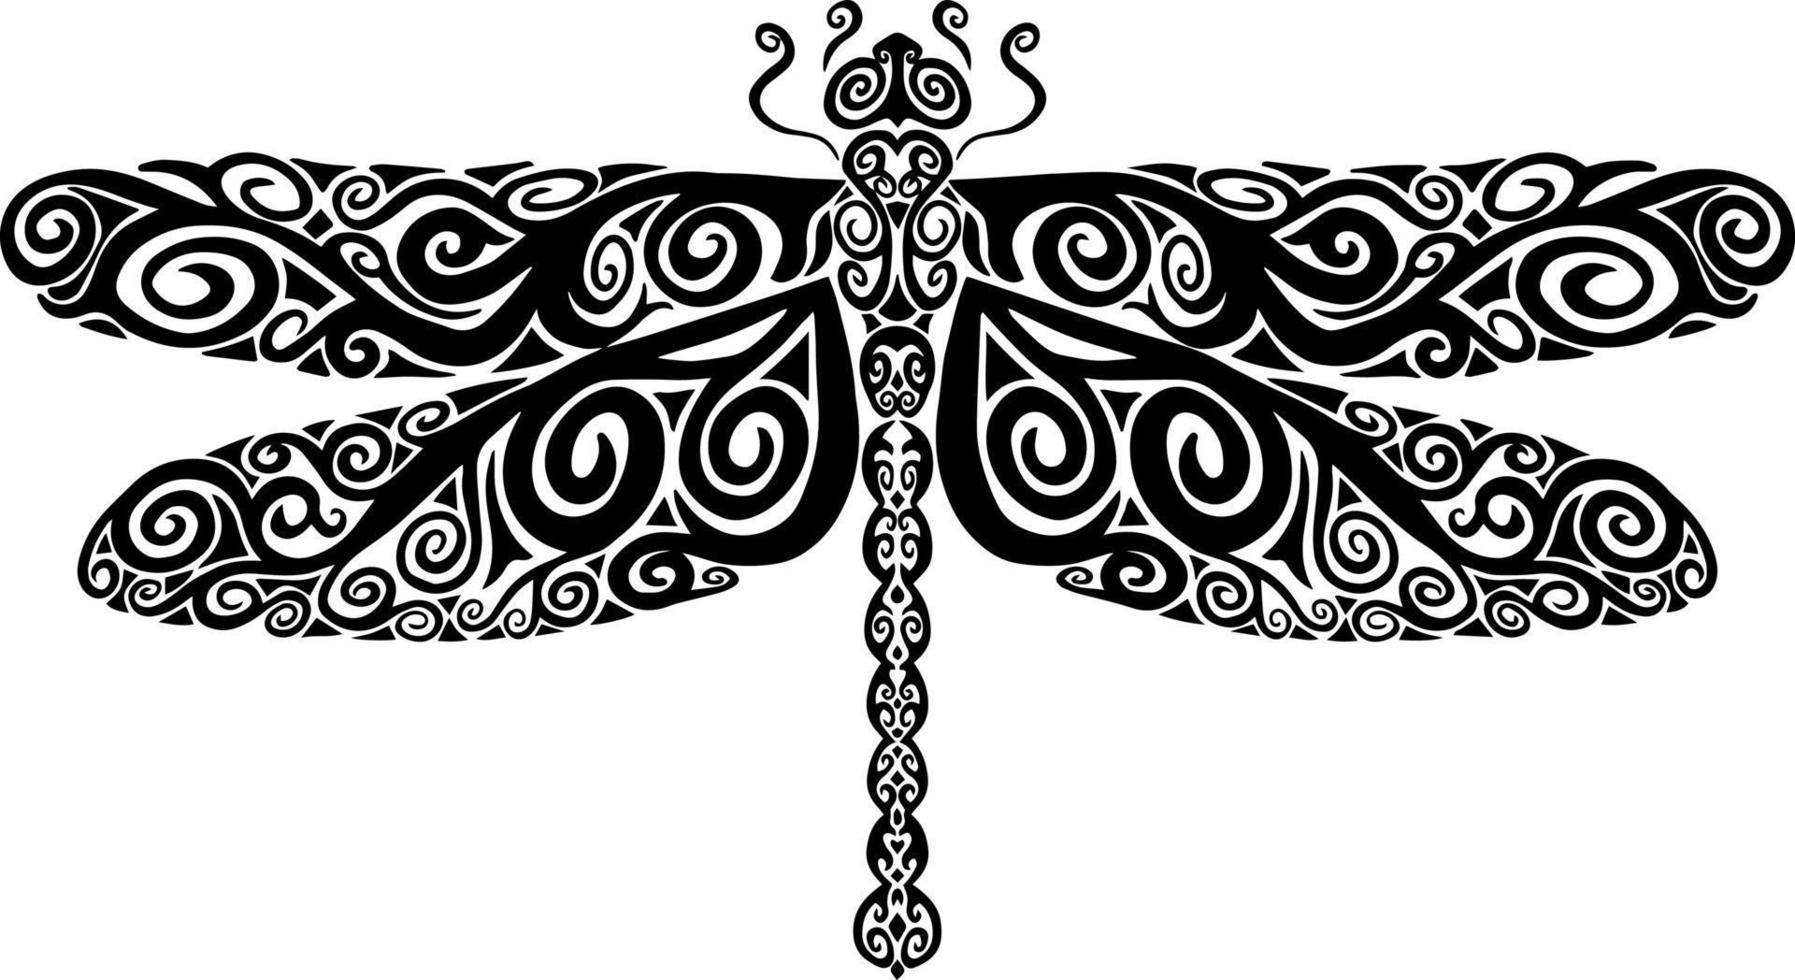 Hand drawn decorative dragonfly in zentangle style vector